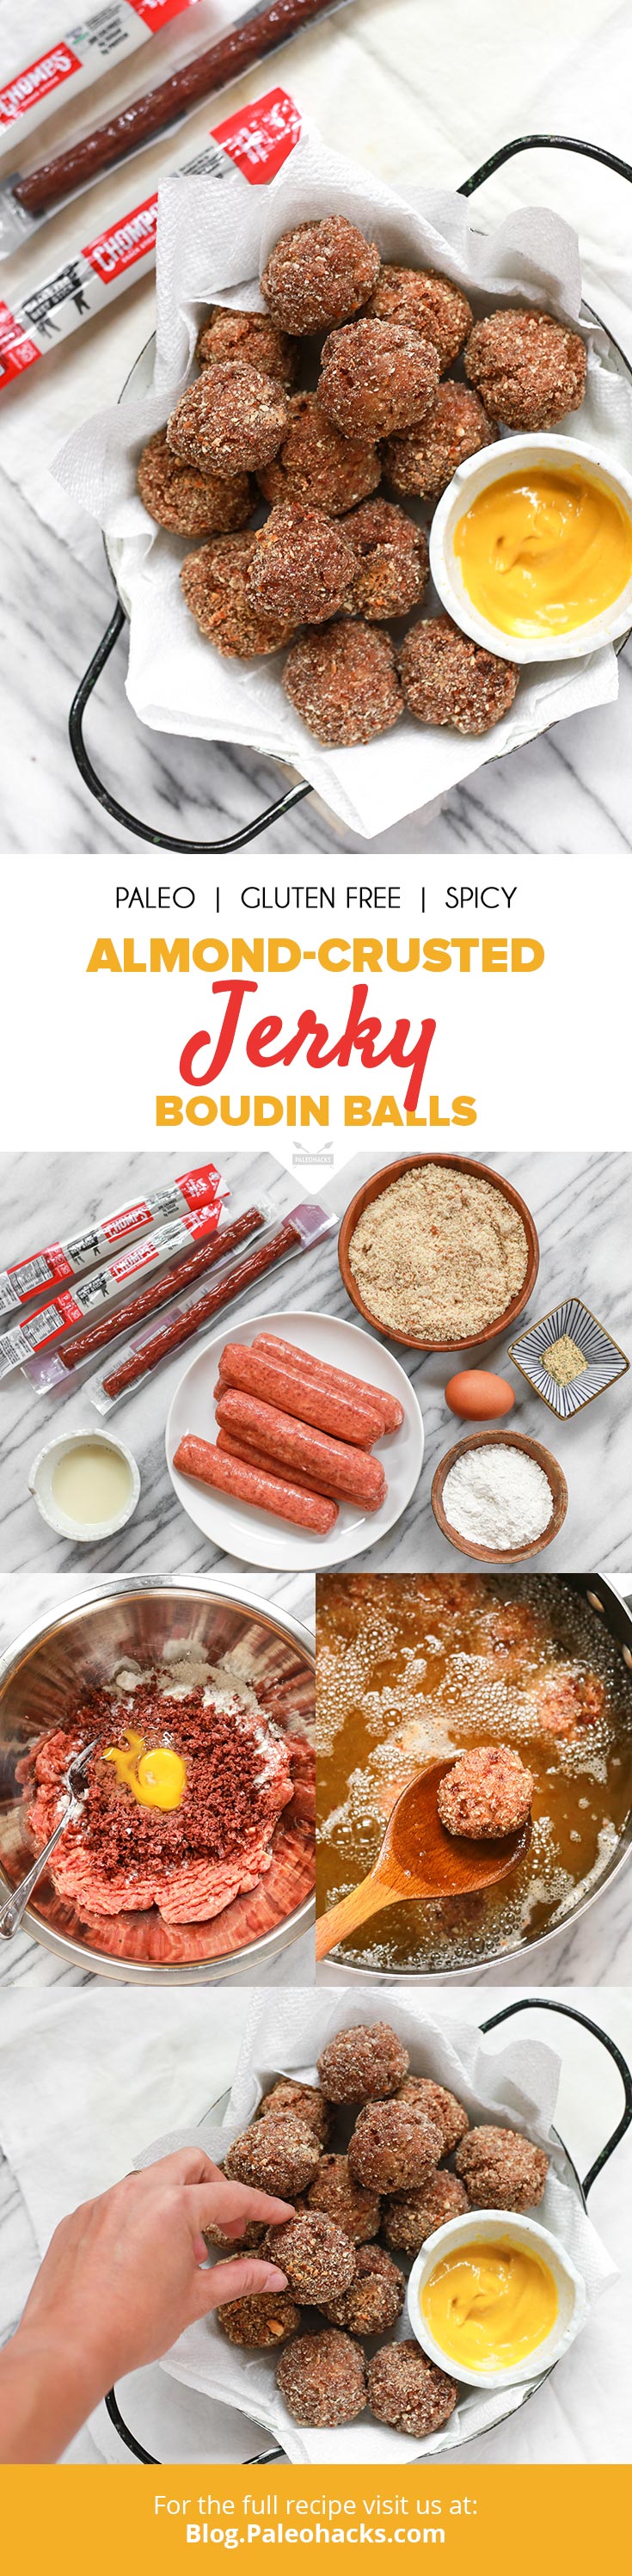 If you like meatballs, then you’ll love these Cajun-inspired boudin balls stuffed with beef jerky and sausage.